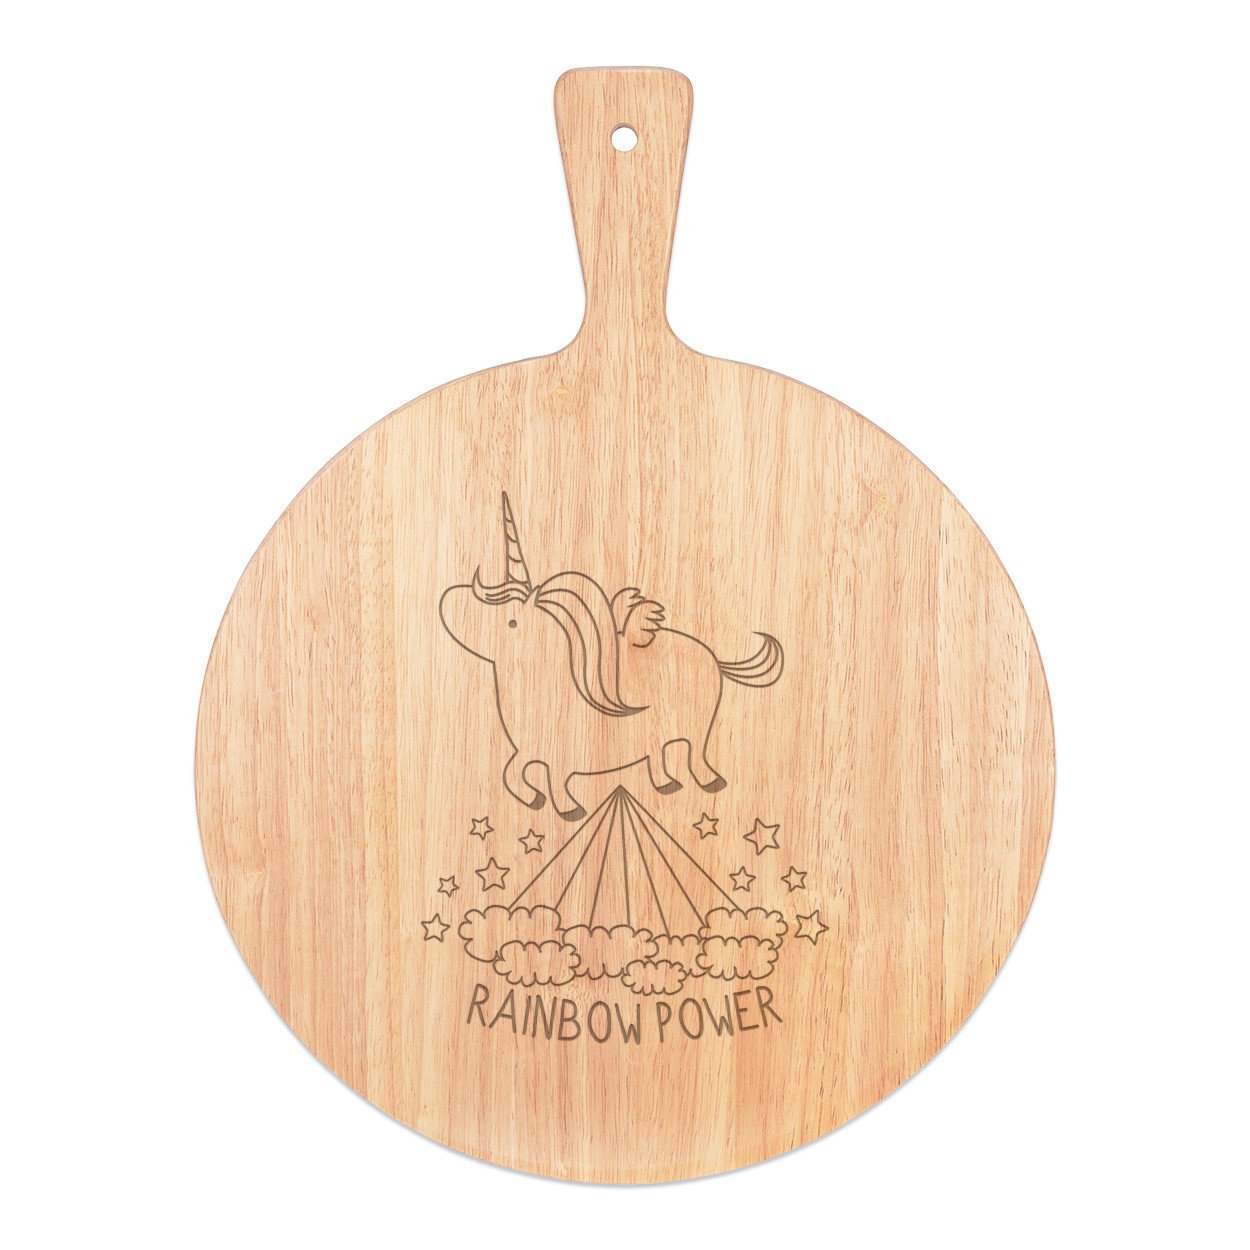 Unicorn Rainbow Power Pizza Board Paddle Serving Tray Handle Round Wooden 45x34cm